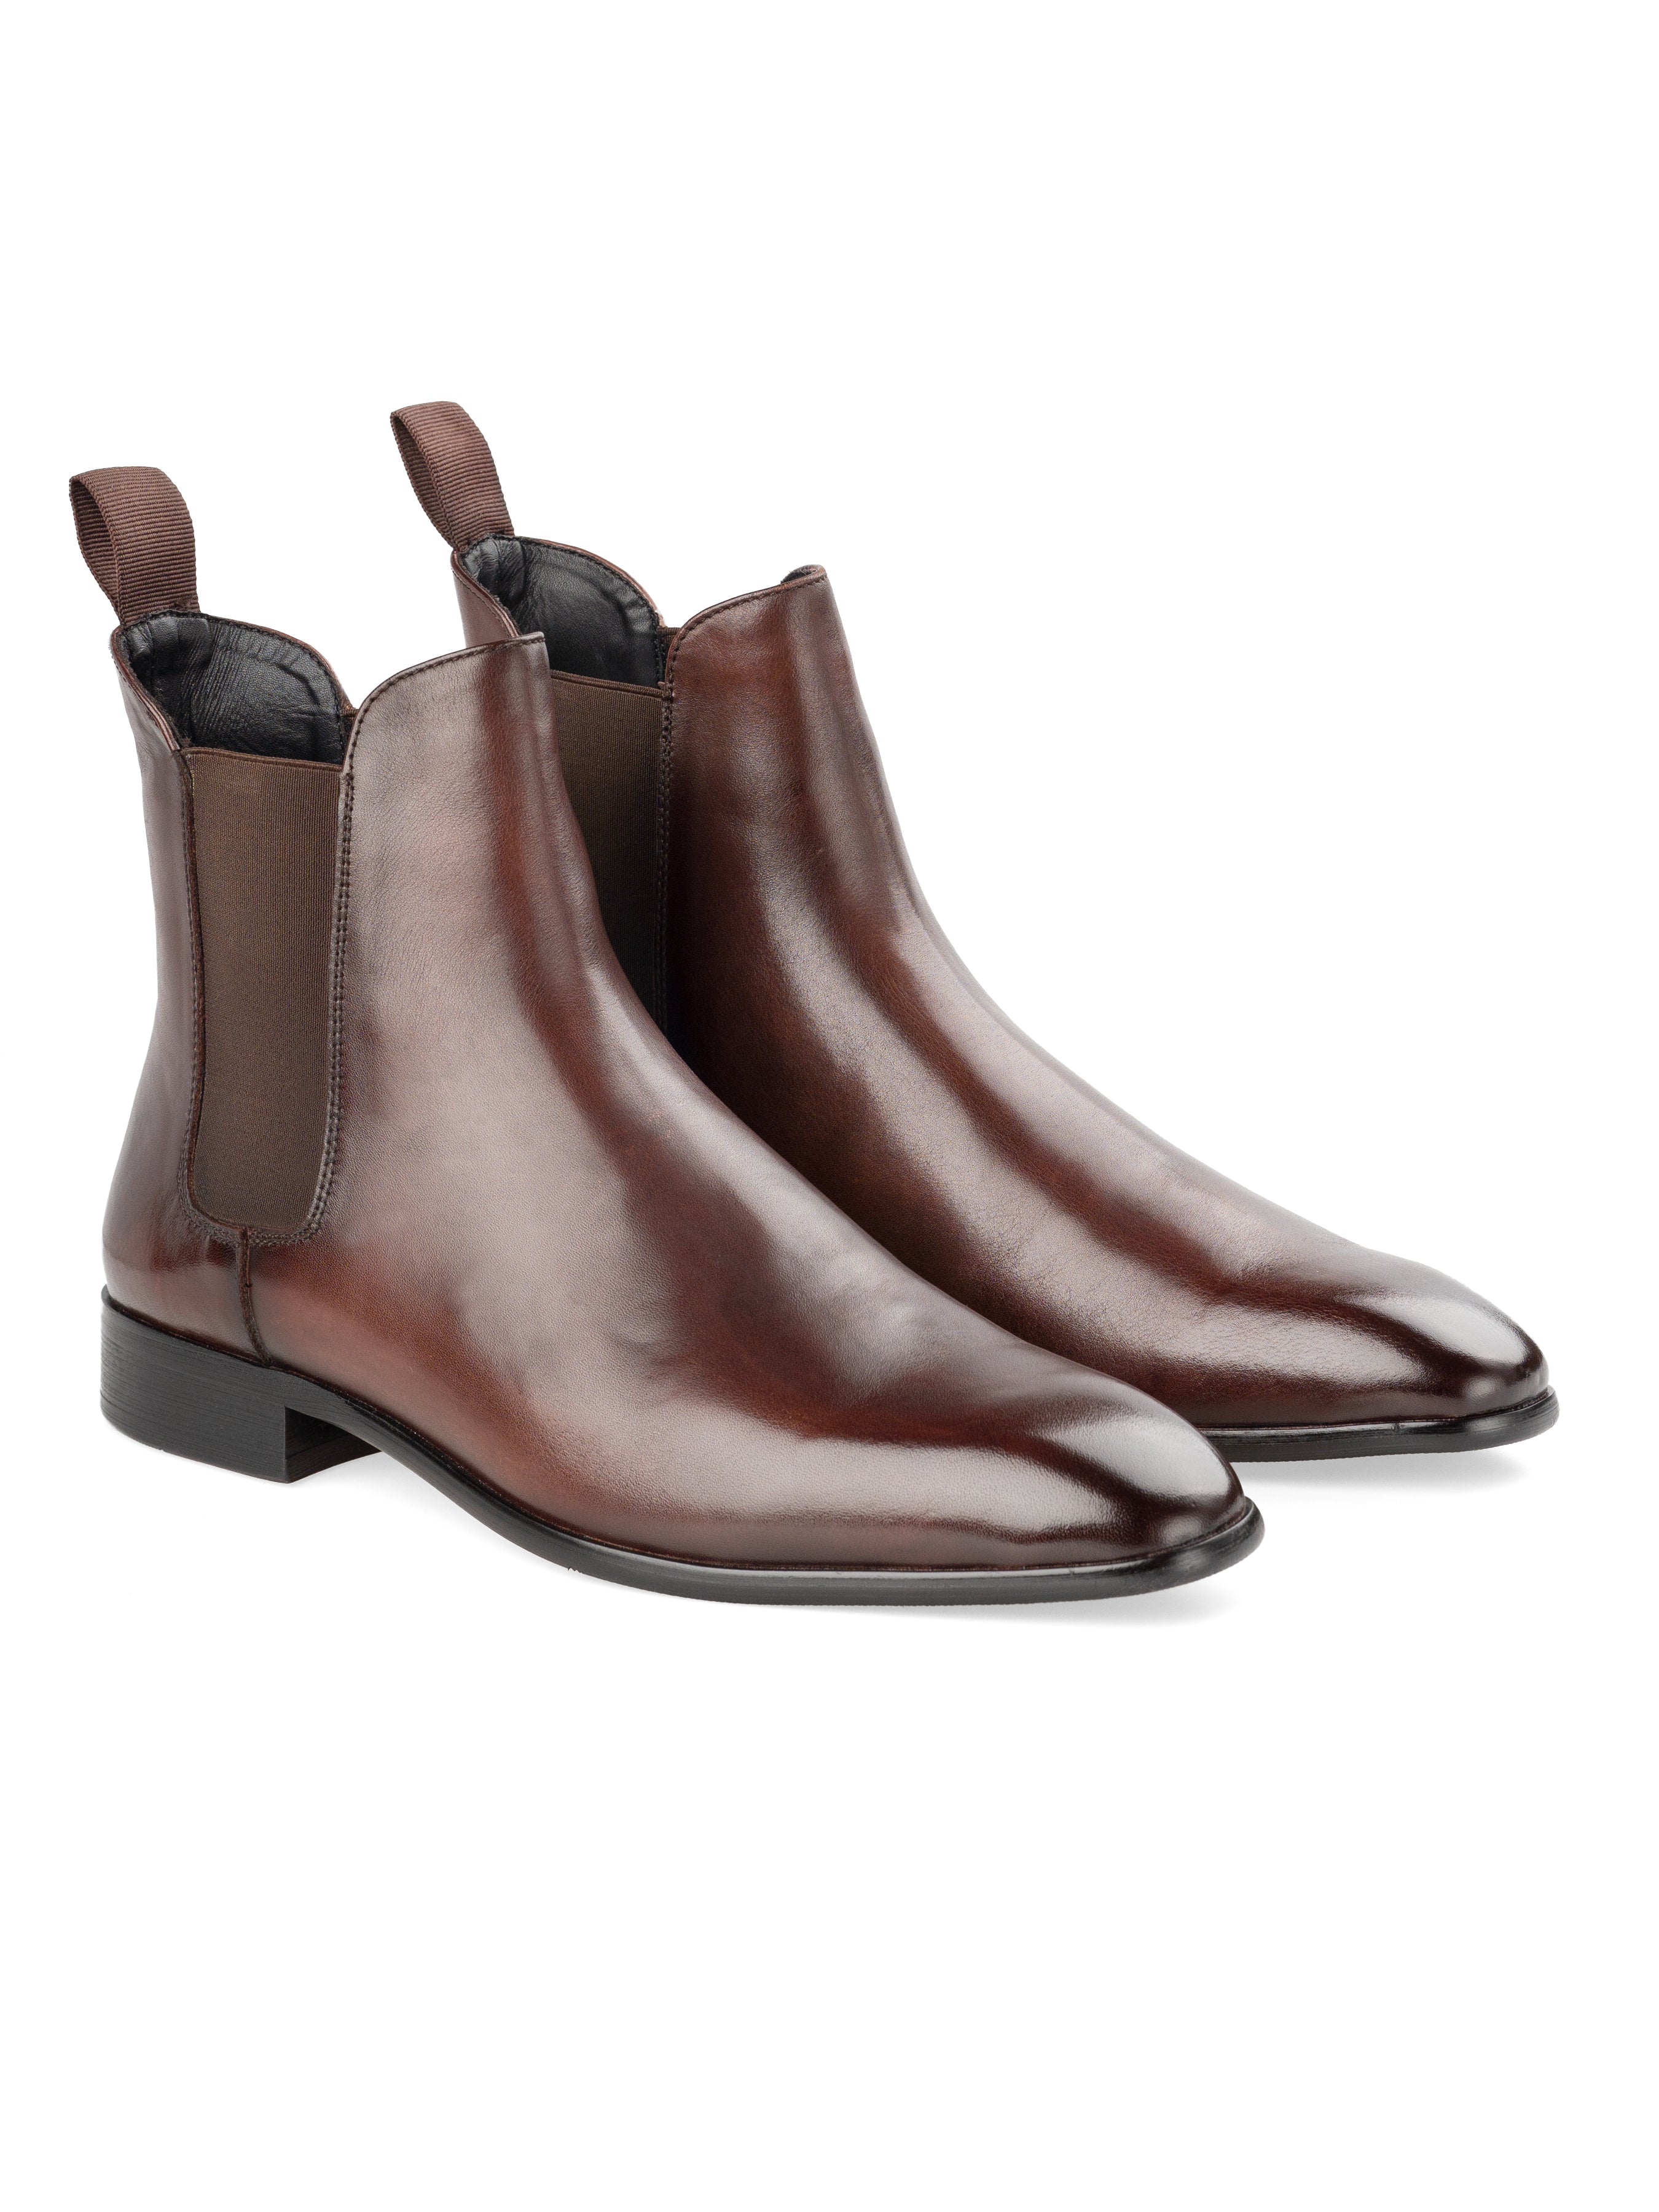 Louis Chelsea Boots - Coffee (Hand Painted Patina)